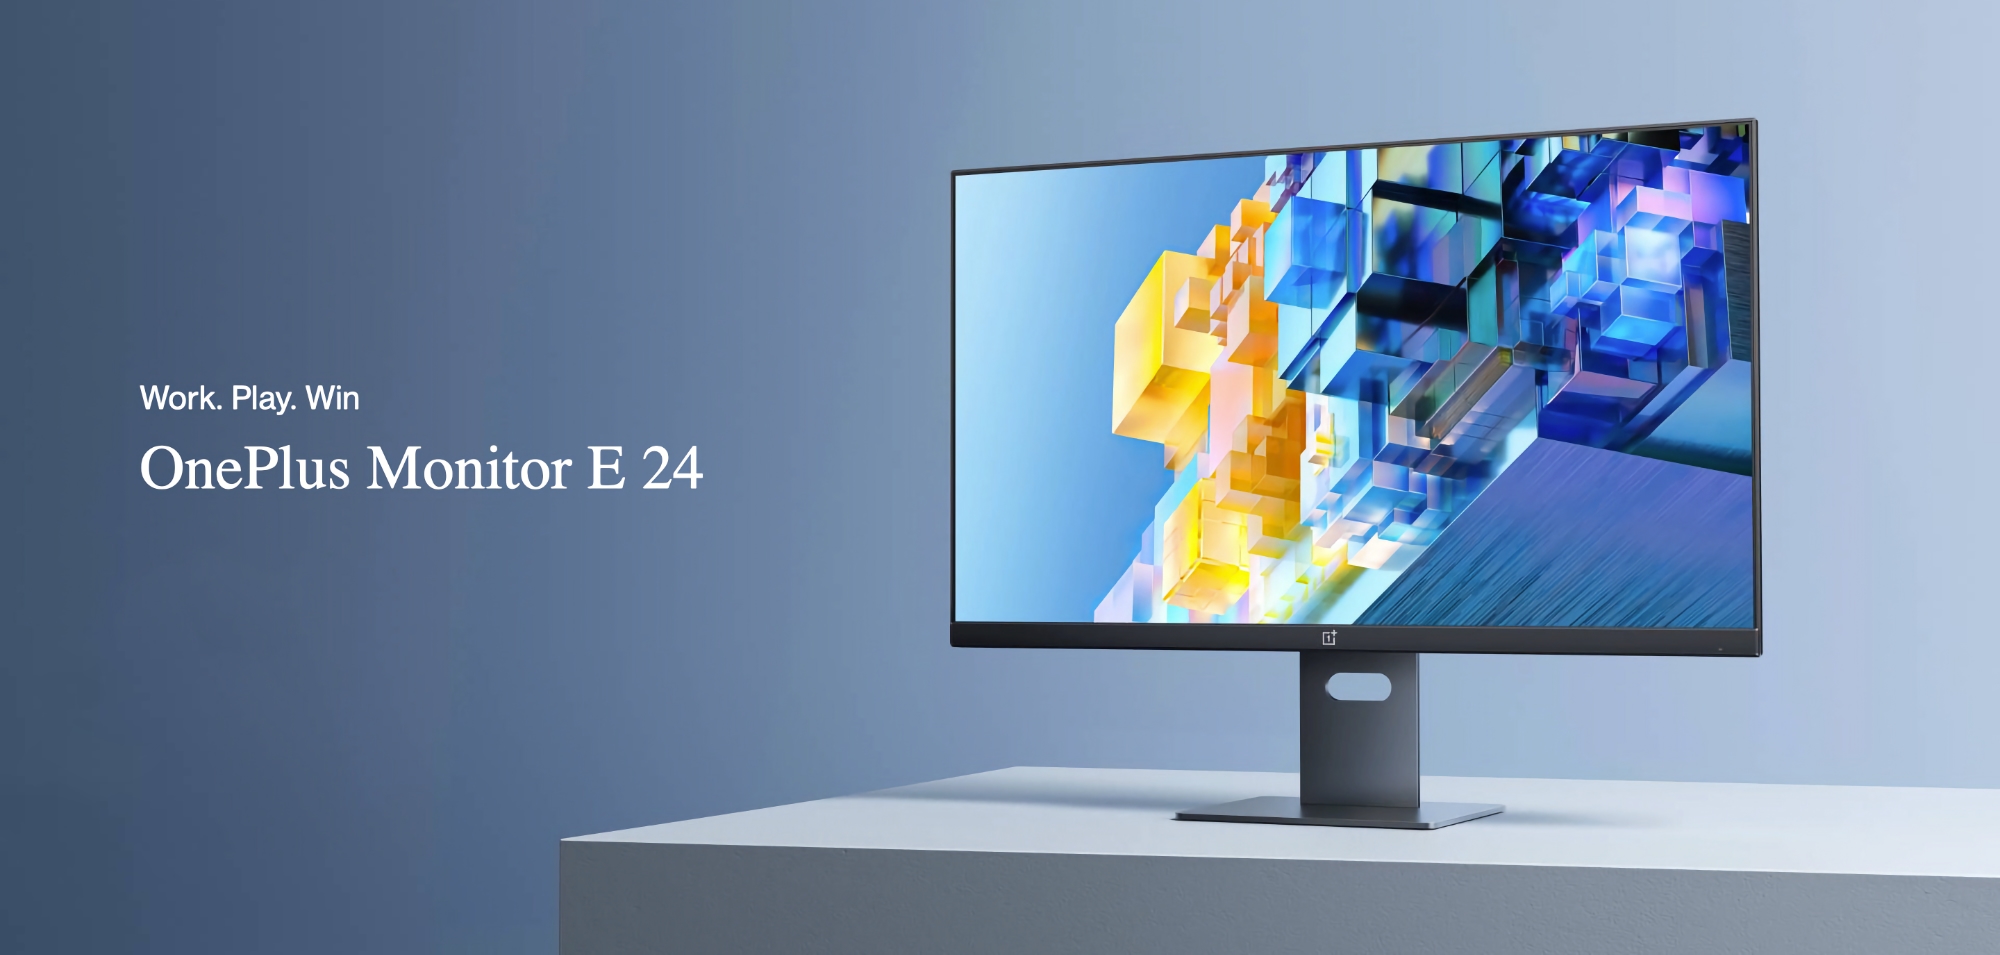 OnePlus Monitor E: 24-inch monitor with IPS FHD 75 Hz screen and a USB-C port with 18W Power Delivery